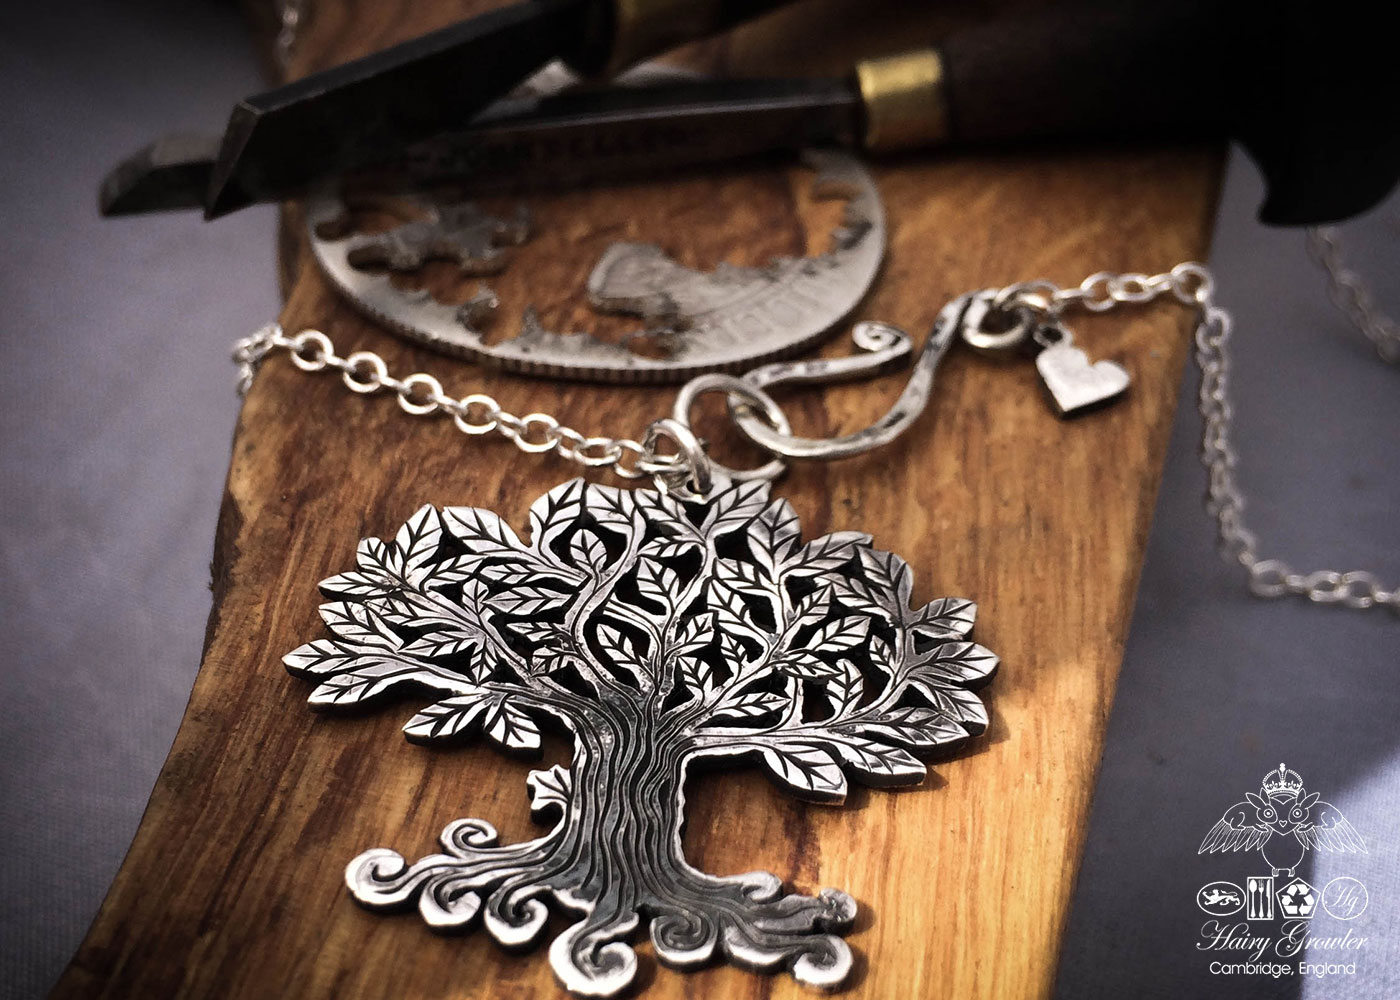 Handcrafted and recycled silver Tree-of-Life necklace made from a British silver coin